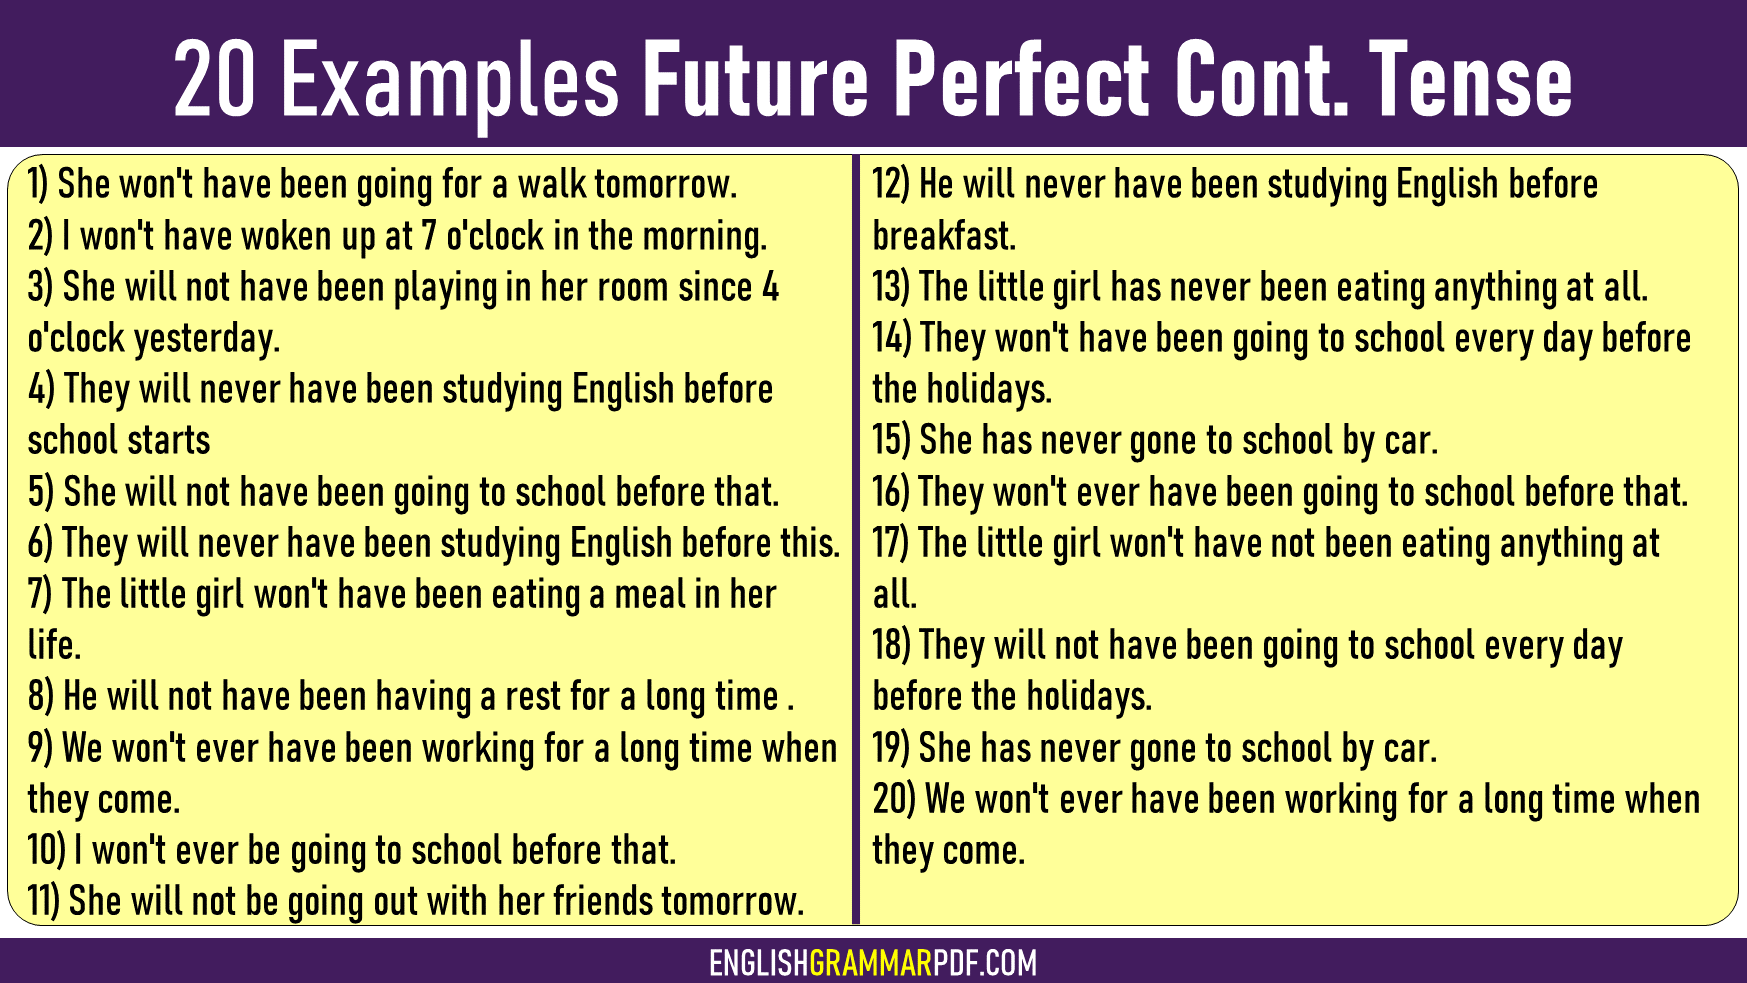 One Example Of Future Perfect Continuous Tense